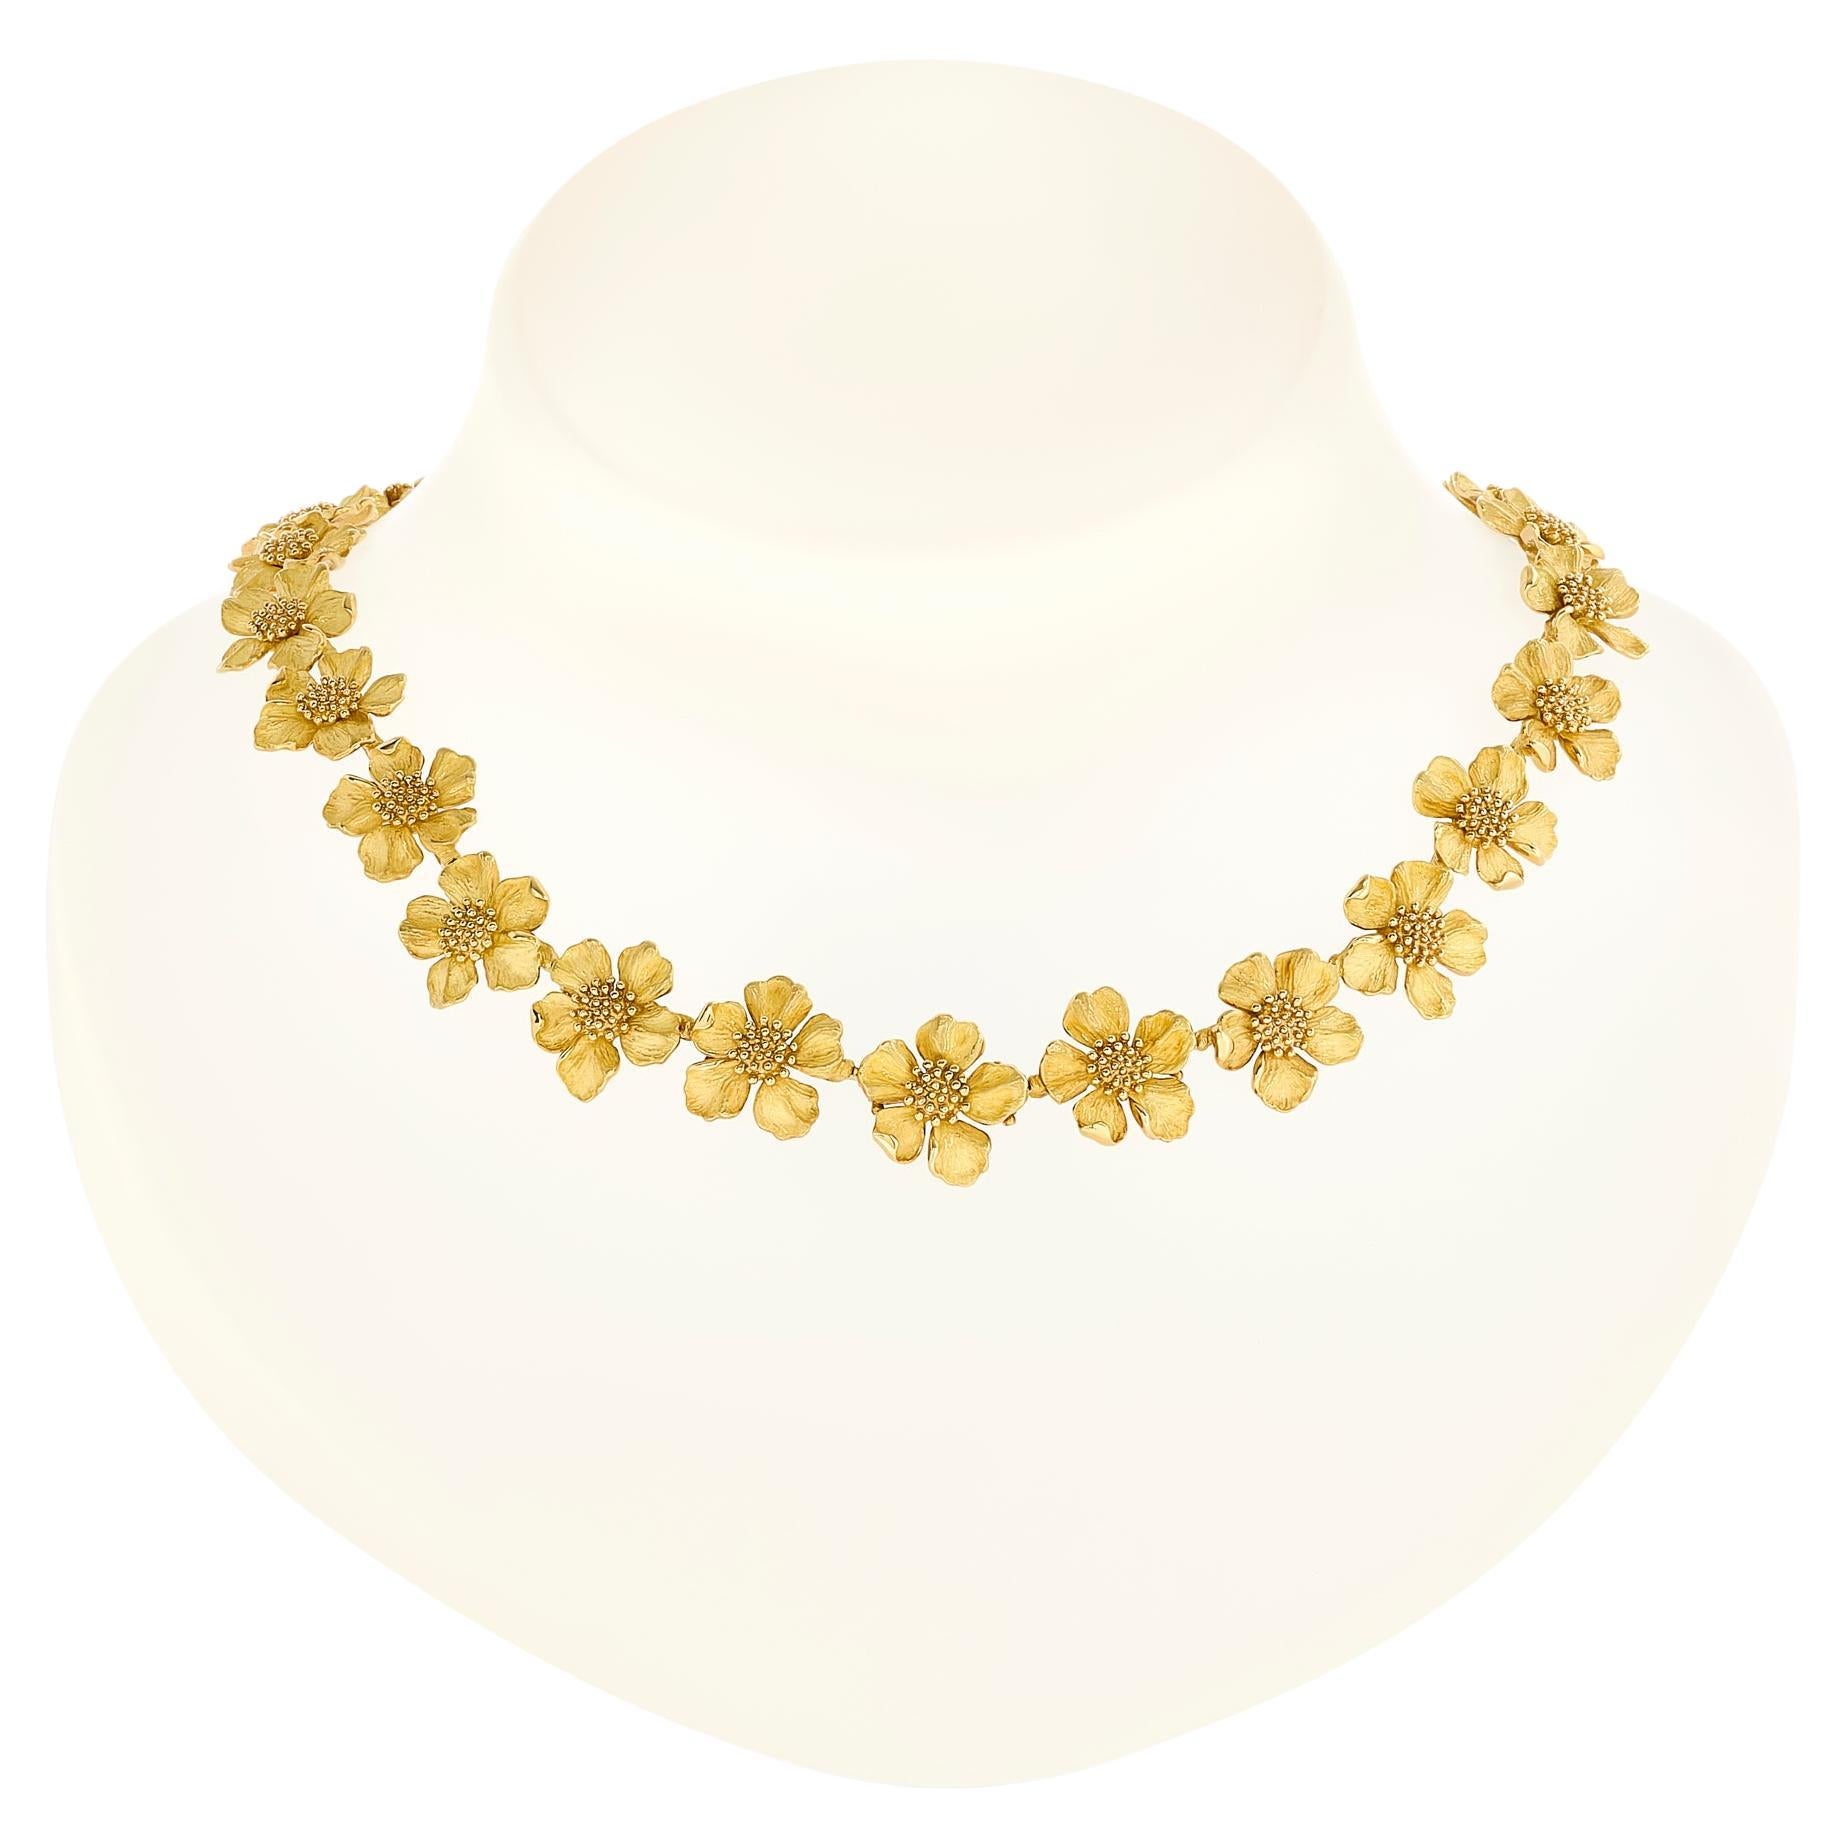 The classic Tiffany & Co. Dogwood flower necklace in all 18 karat yellow gold is a stunning piece of jewelry that exudes elegance and timeless beauty. 

Signed 